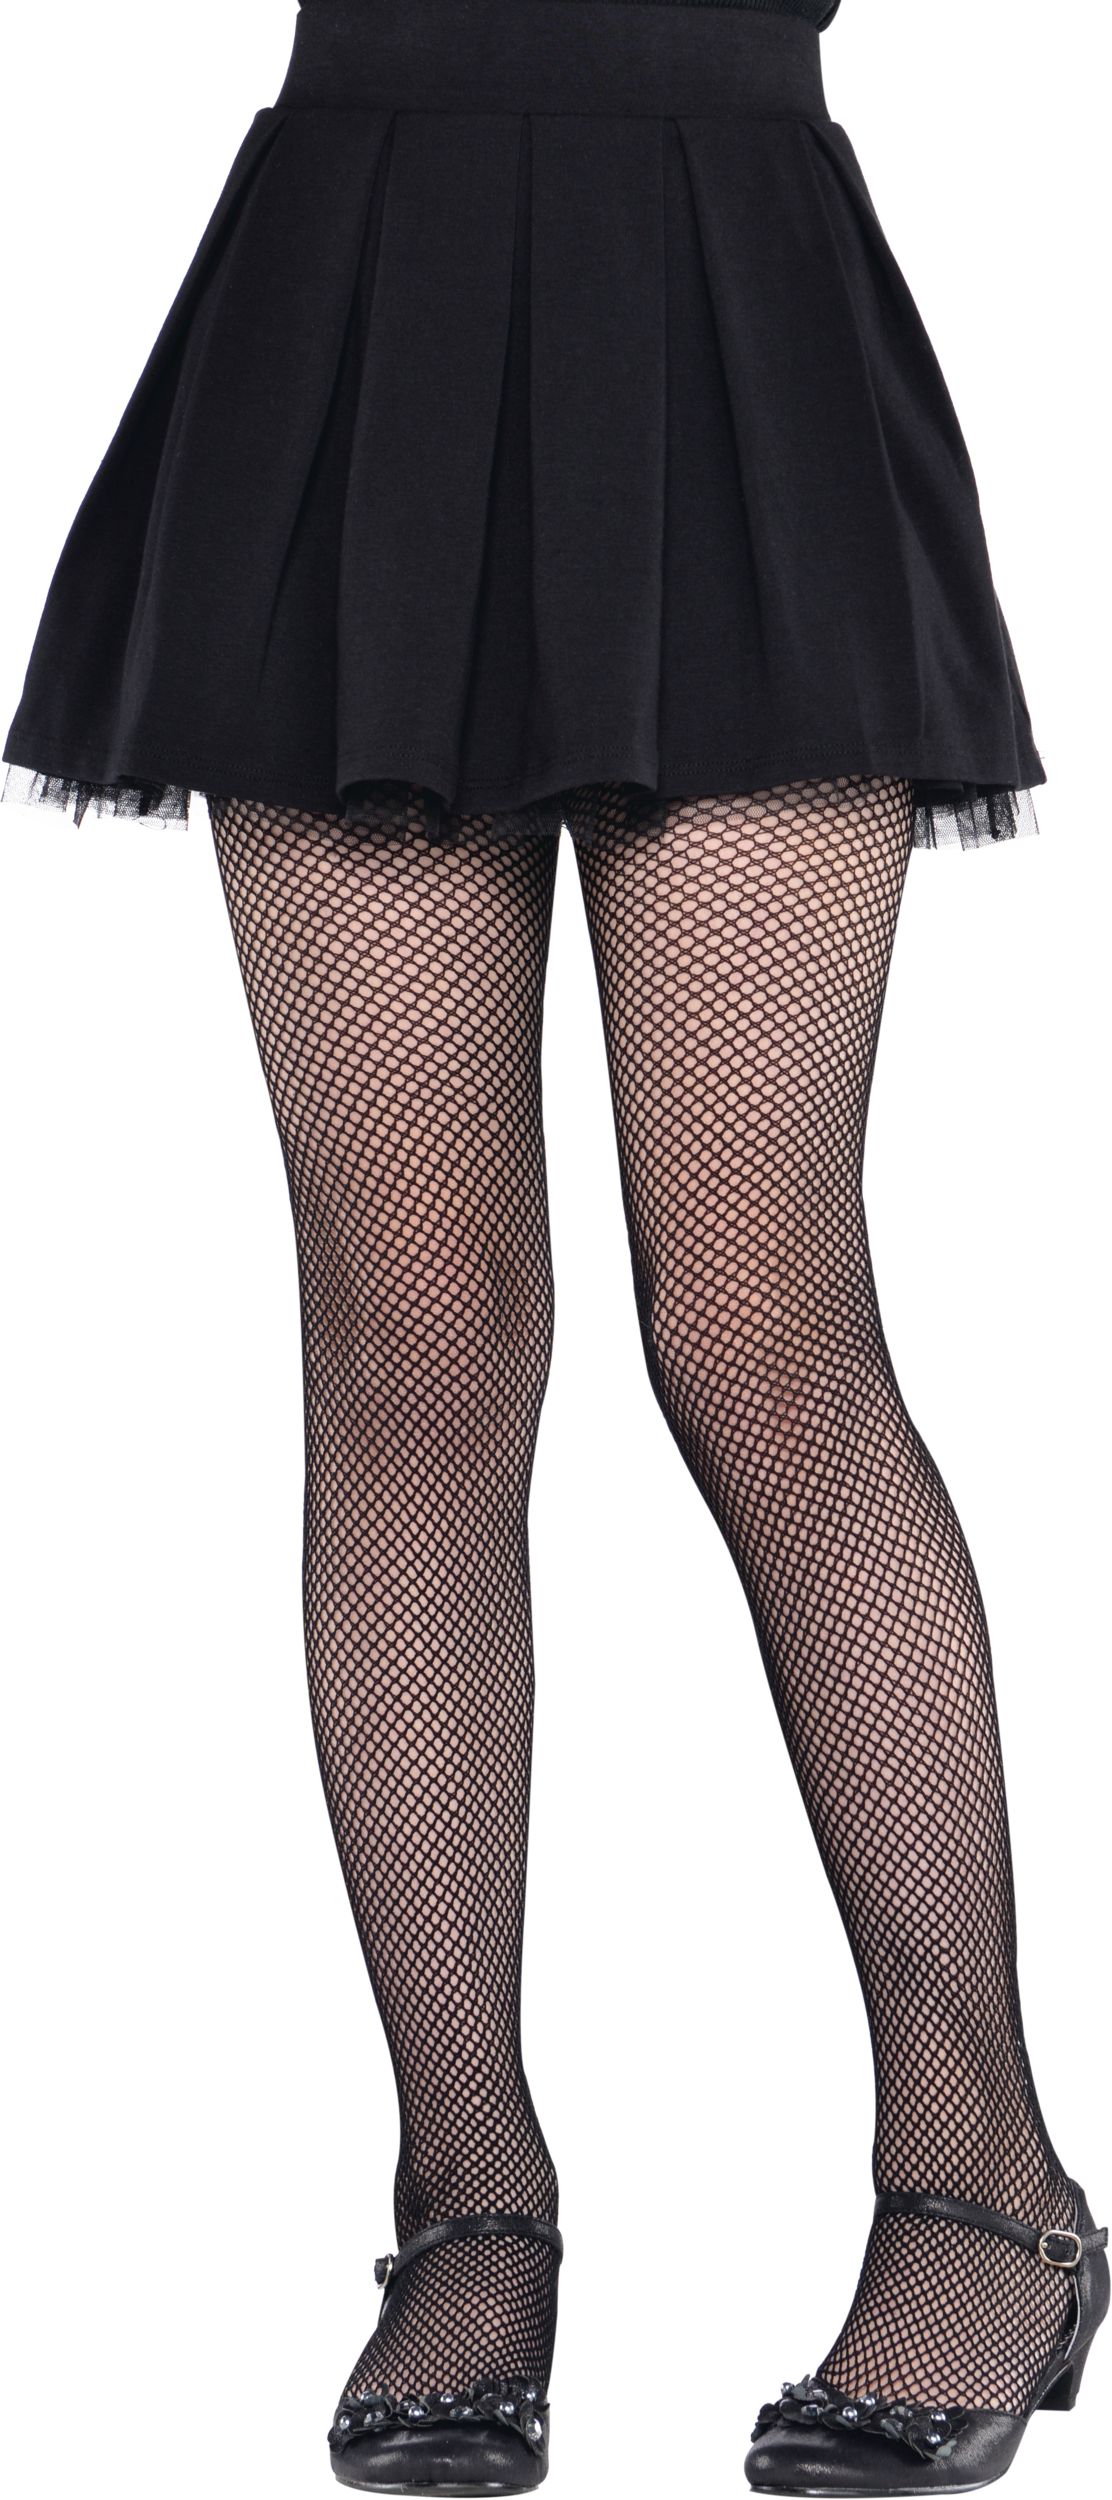 Kids' Fishnet Tights, Black, Assorted Sizes, Wearable Costume